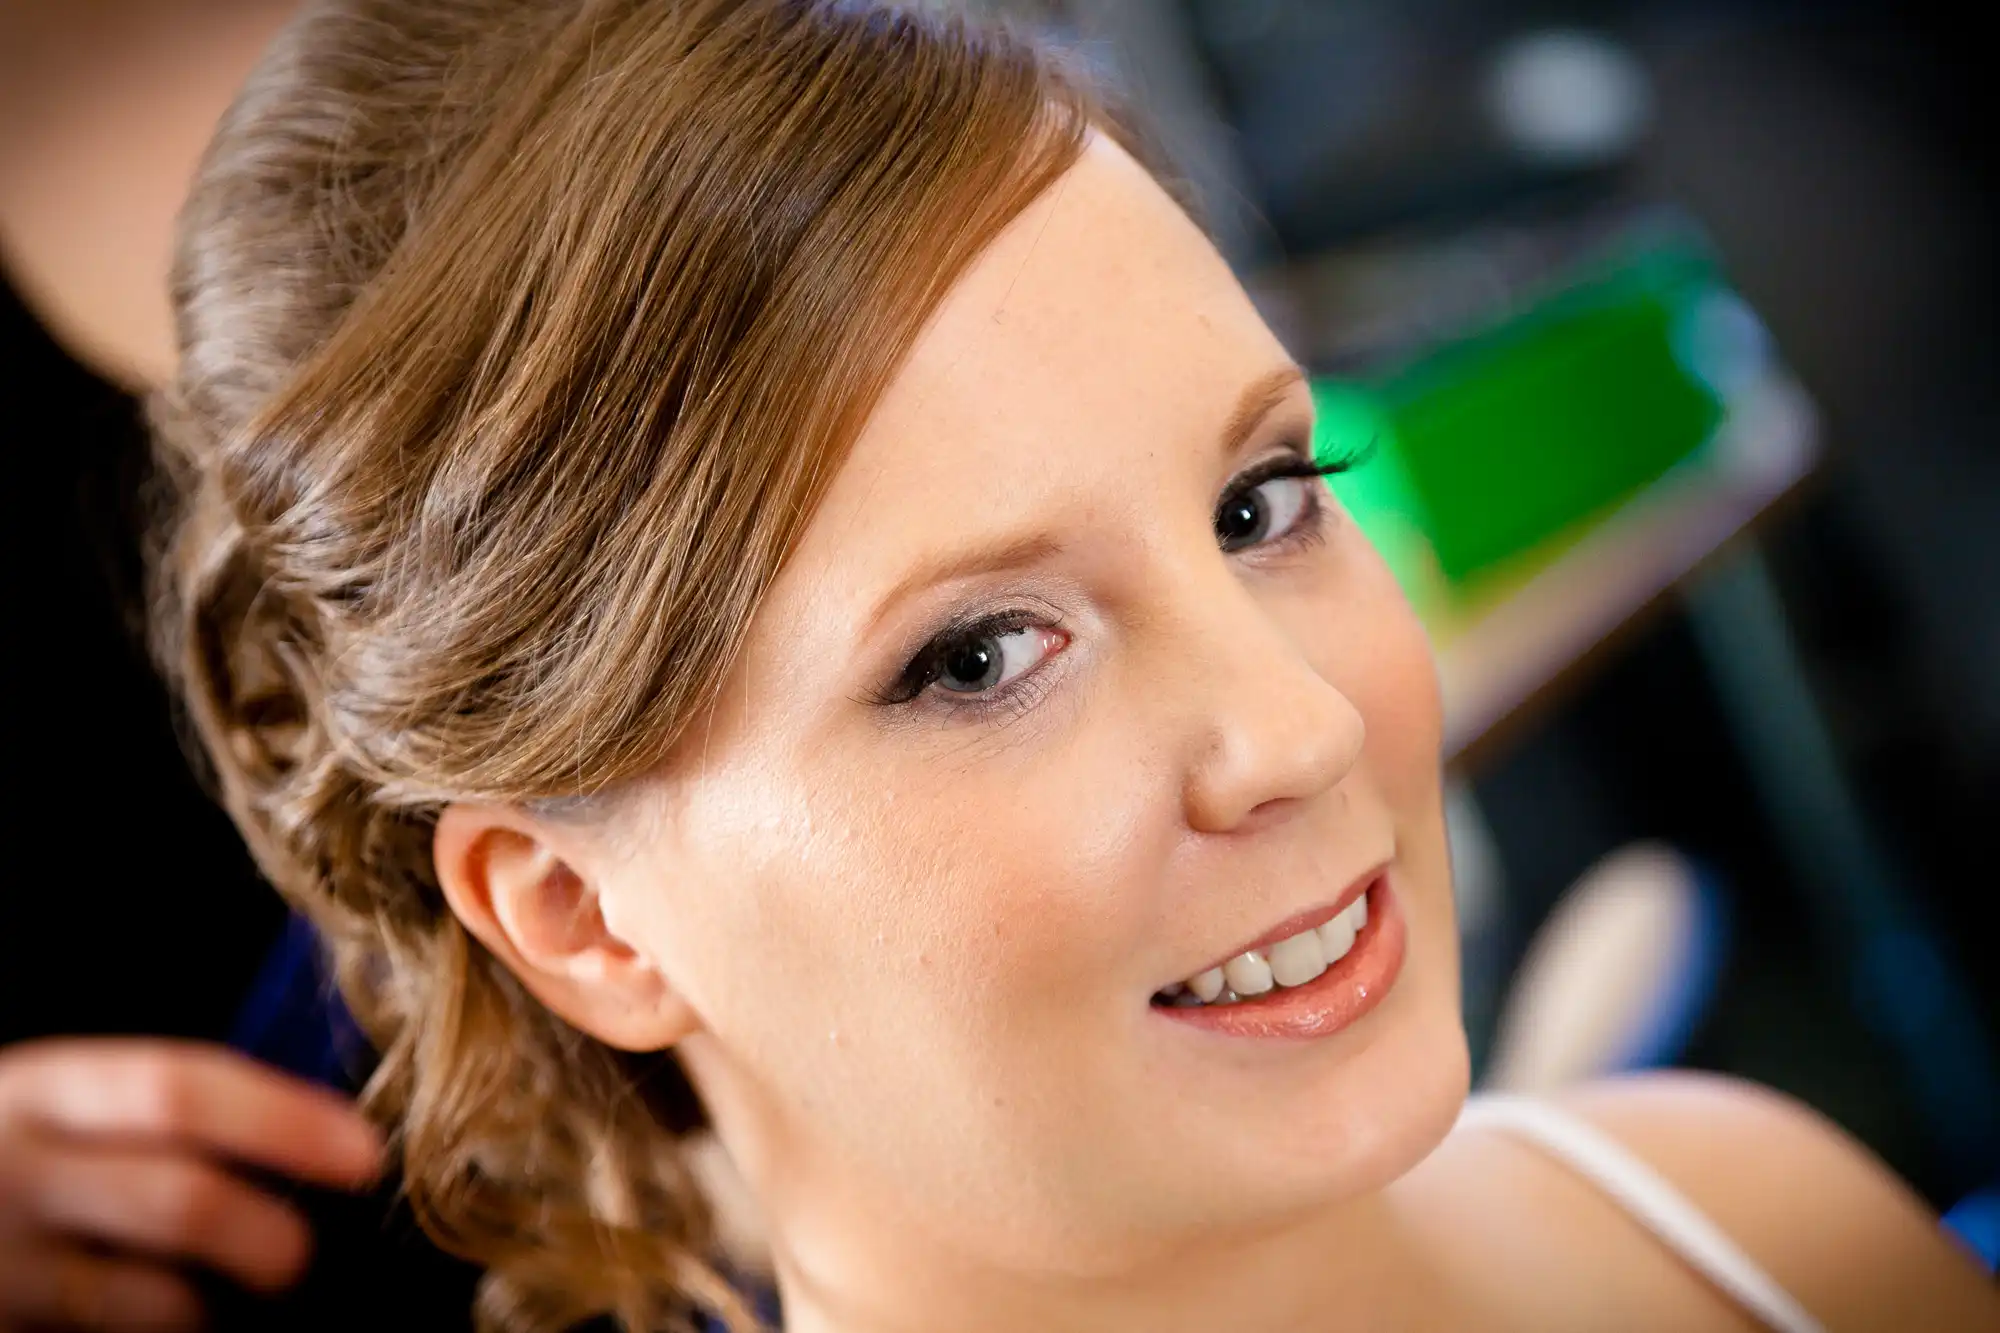 A woman with styled hair and makeup smiling at the camera, in a salon setting with blurred background.